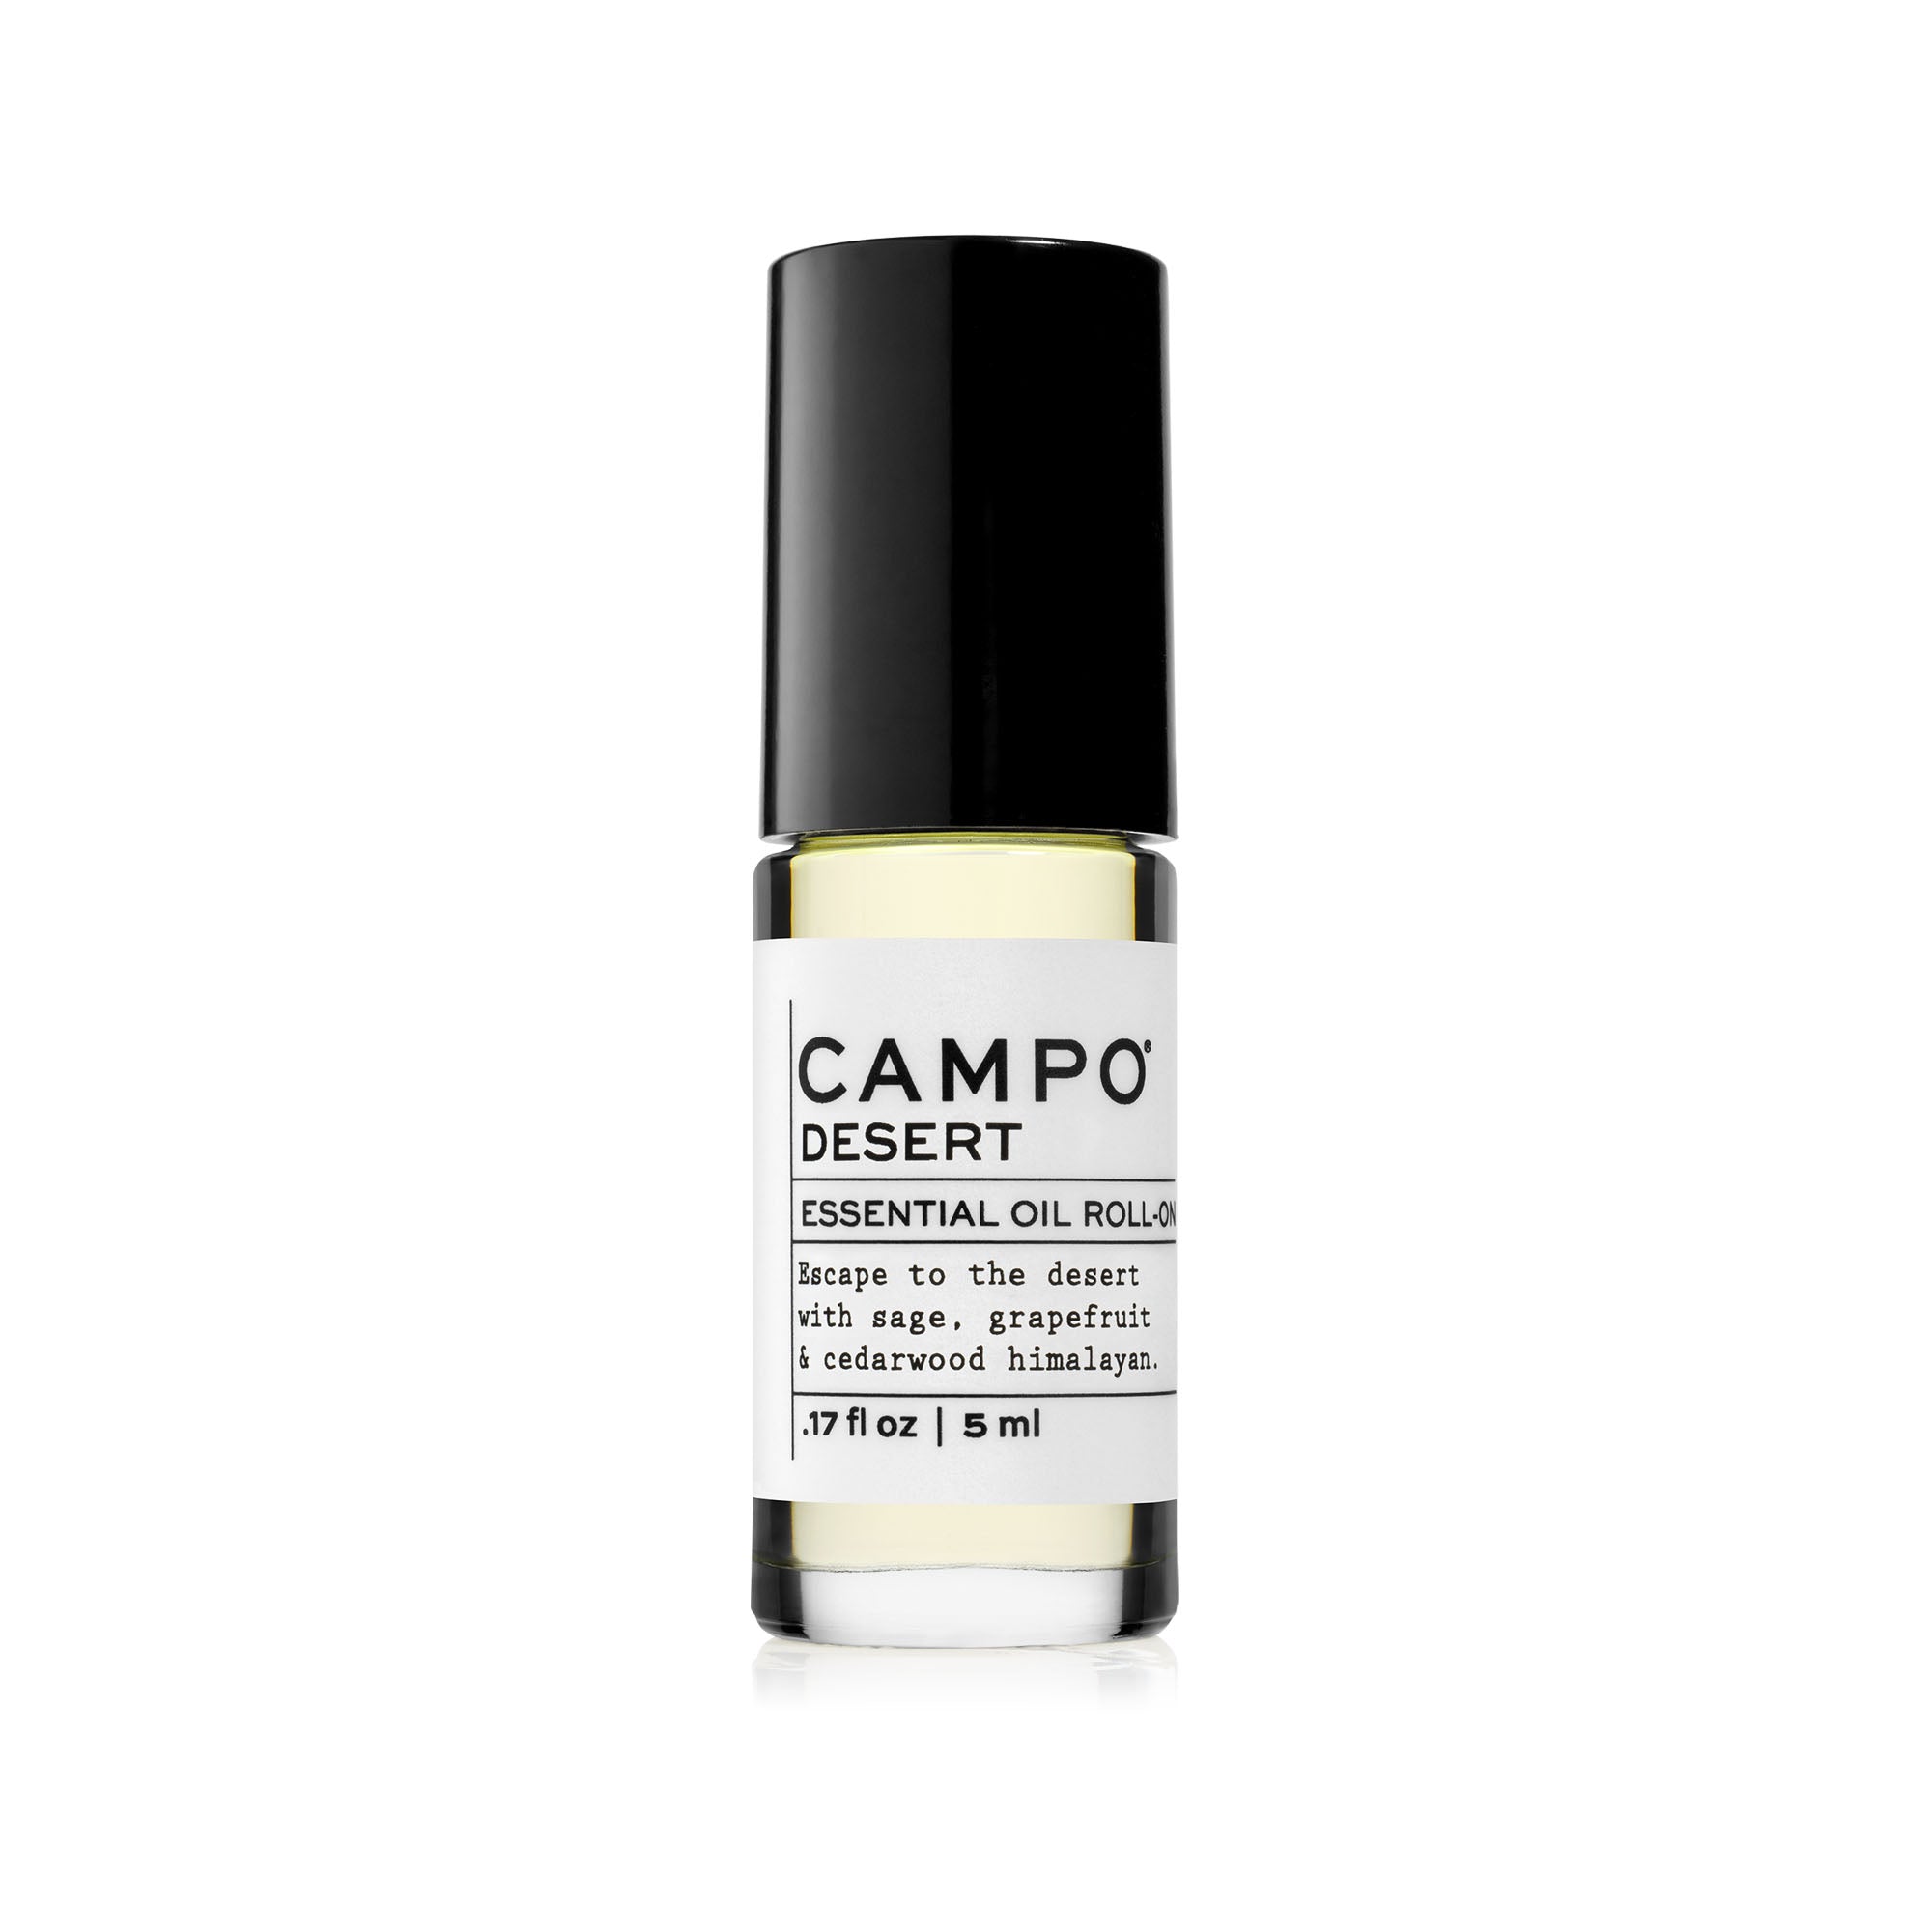 WOODS Beauty Essential Oil DESERT Roll-On in 5 ml. Escape to the canyon with this 100% pure essential oil blend of juniper berry, patchouli, eucalyptus radiate, and sandalwood. Inspired by hikes through rustling eucalyptus, juniper berry & patchouli-filled mountains.